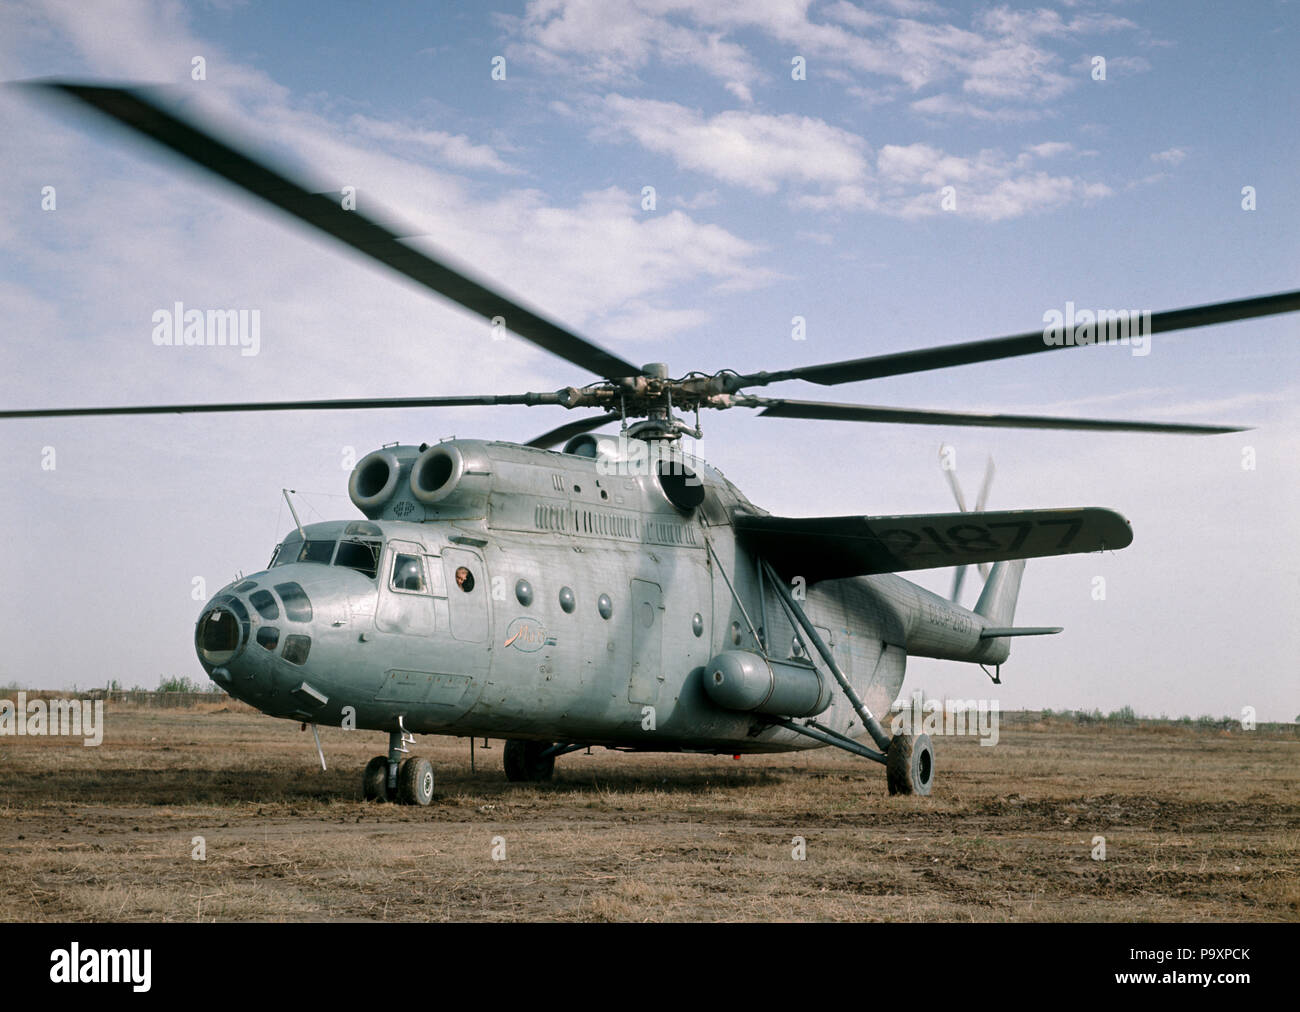 The Mil Mi-6 heavy helicopter pictured before take-off. Stock Photo